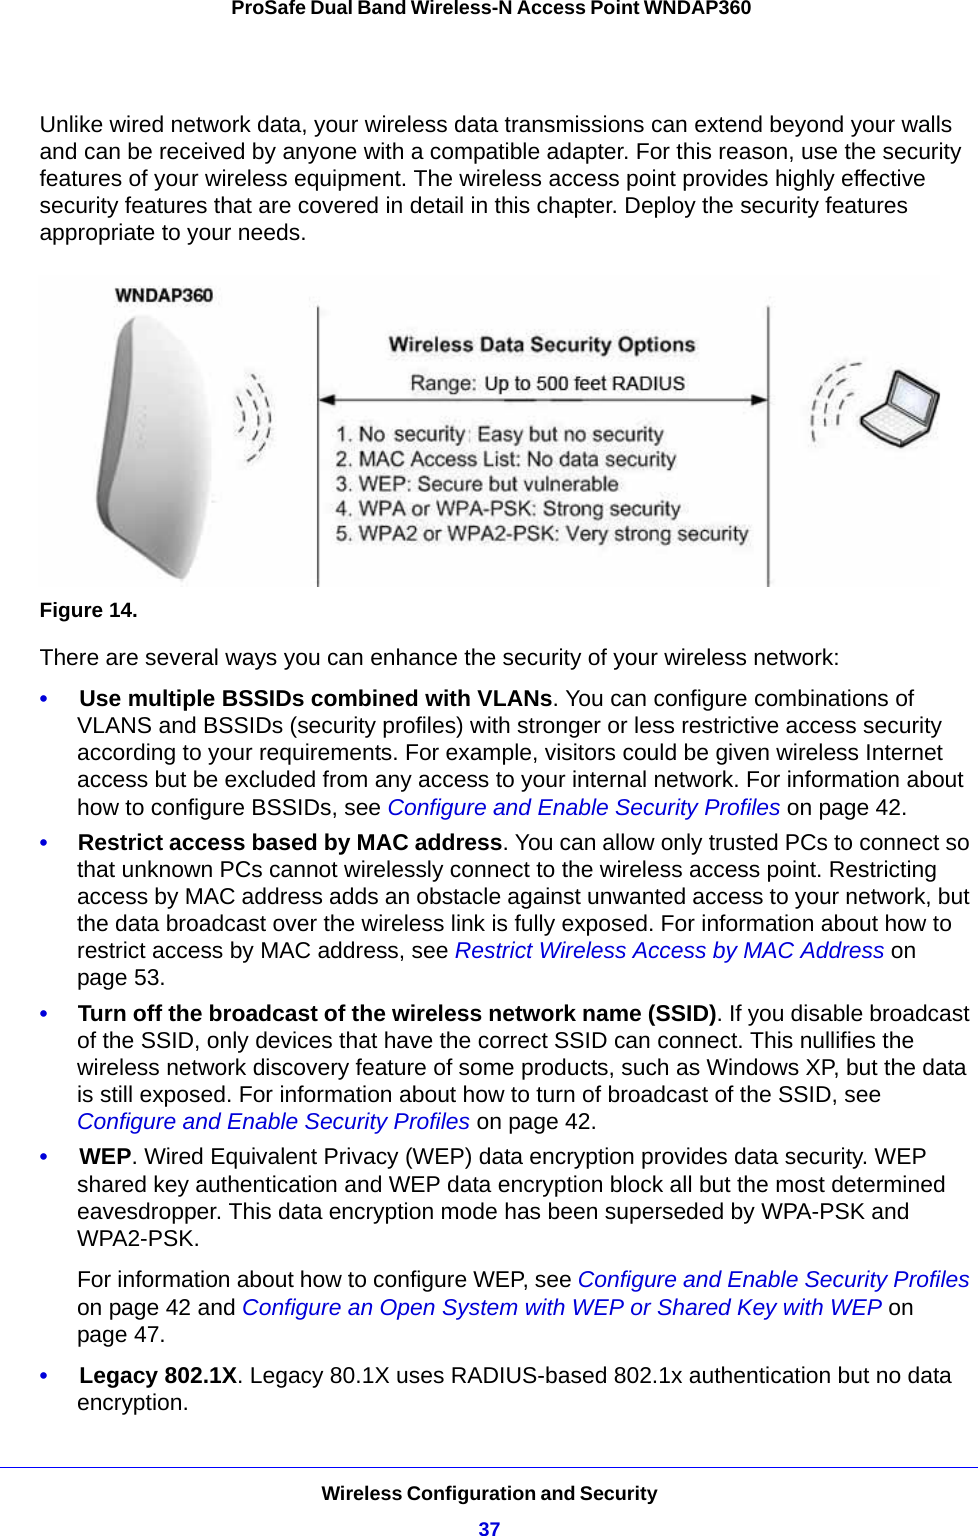 Wireless Configuration and Security37 ProSafe Dual Band Wireless-N Access Point WNDAP360Unlike wired network data, your wireless data transmissions can extend beyond your walls and can be received by anyone with a compatible adapter. For this reason, use the security features of your wireless equipment. The wireless access point provides highly effective security features that are covered in detail in this chapter. Deploy the security features appropriate to your needs.Figure 14. There are several ways you can enhance the security of your wireless network:•     Use multiple BSSIDs combined with VLANs. You can configure combinations of VLANS and BSSIDs (security profiles) with stronger or less restrictive access security according to your requirements. For example, visitors could be given wireless Internet access but be excluded from any access to your internal network. For information about how to configure BSSIDs, see Configure and Enable Security Profiles on page 42.•     Restrict access based by MAC address. You can allow only trusted PCs to connect so that unknown PCs cannot wirelessly connect to the wireless access point. Restricting access by MAC address adds an obstacle against unwanted access to your network, but the data broadcast over the wireless link is fully exposed. For information about how to restrict access by MAC address, see Restrict Wireless Access by MAC Address on page 53.•     Turn off the broadcast of the wireless network name (SSID). If you disable broadcast of the SSID, only devices that have the correct SSID can connect. This nullifies the wireless network discovery feature of some products, such as Windows XP, but the data is still exposed. For information about how to turn of broadcast of the SSID, see Configure and Enable Security Profiles on page 42.•     WEP. Wired Equivalent Privacy (WEP) data encryption provides data security. WEP shared key authentication and WEP data encryption block all but the most determined eavesdropper. This data encryption mode has been superseded by WPA-PSK and WPA2-PSK. For information about how to configure WEP, see Configure and Enable Security Profiles on page 42 and Configure an Open System with WEP or Shared Key with WEP on page 47.•     Legacy 802.1X. Legacy 80.1X uses RADIUS-based 802.1x authentication but no data encryption.